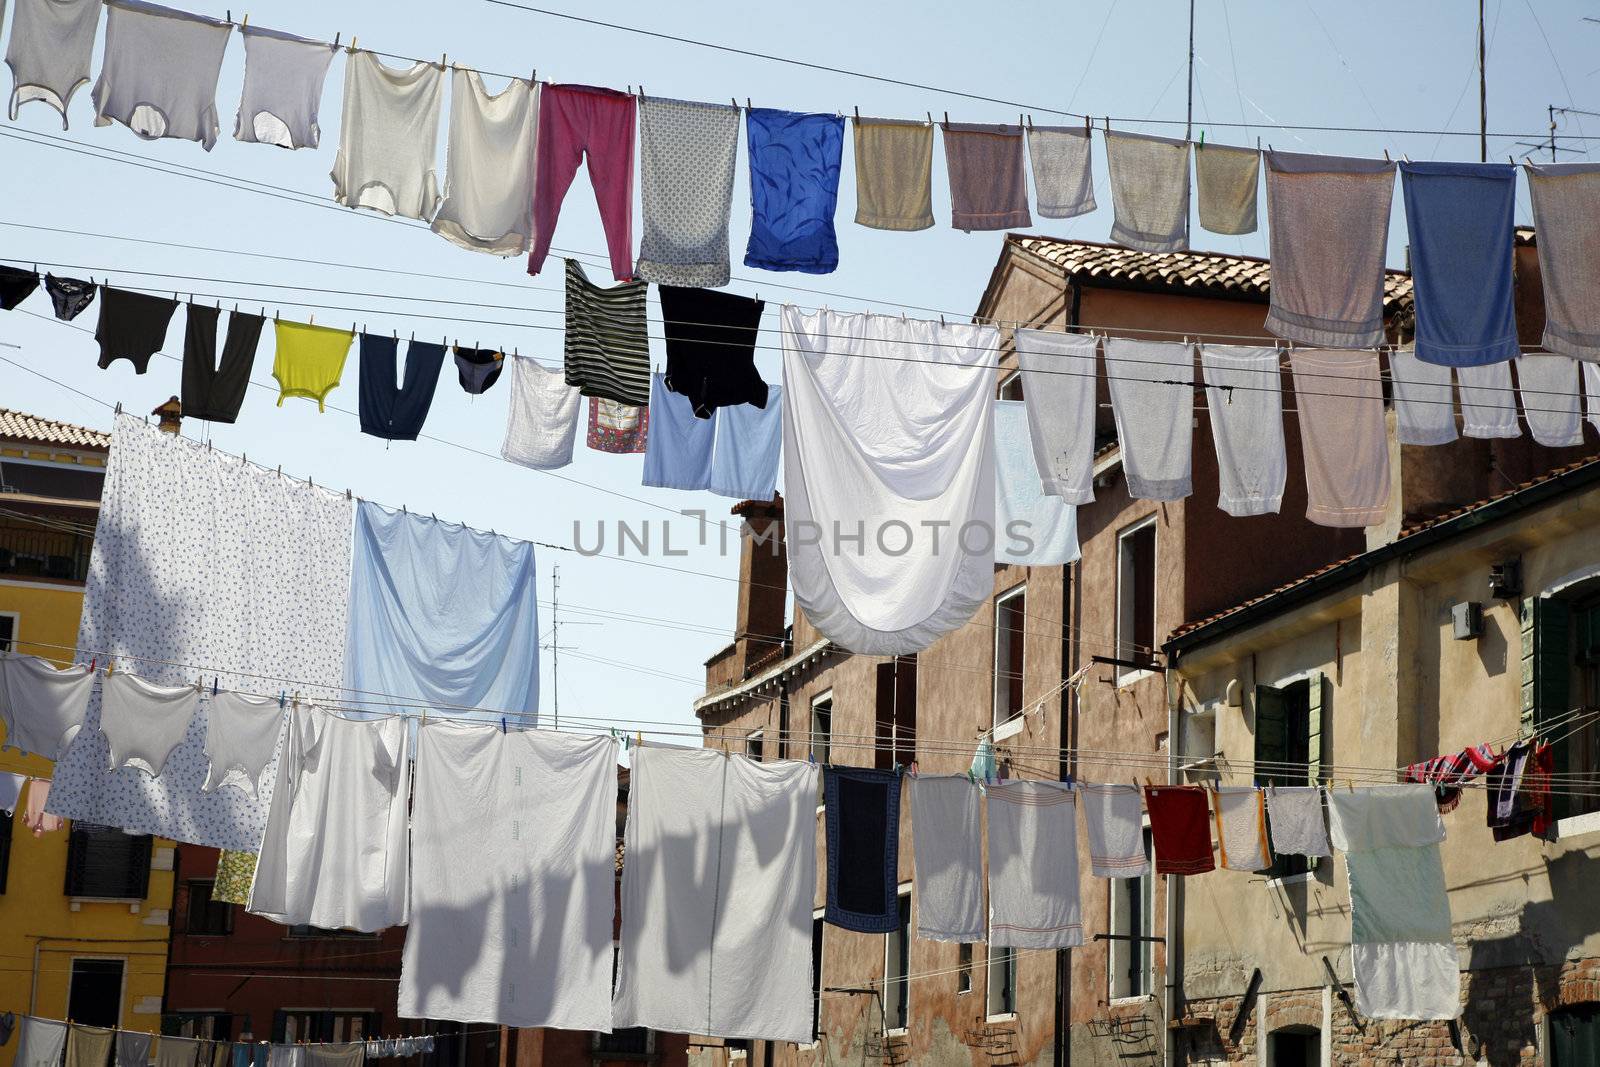 Washing day Venice. by ABCDK